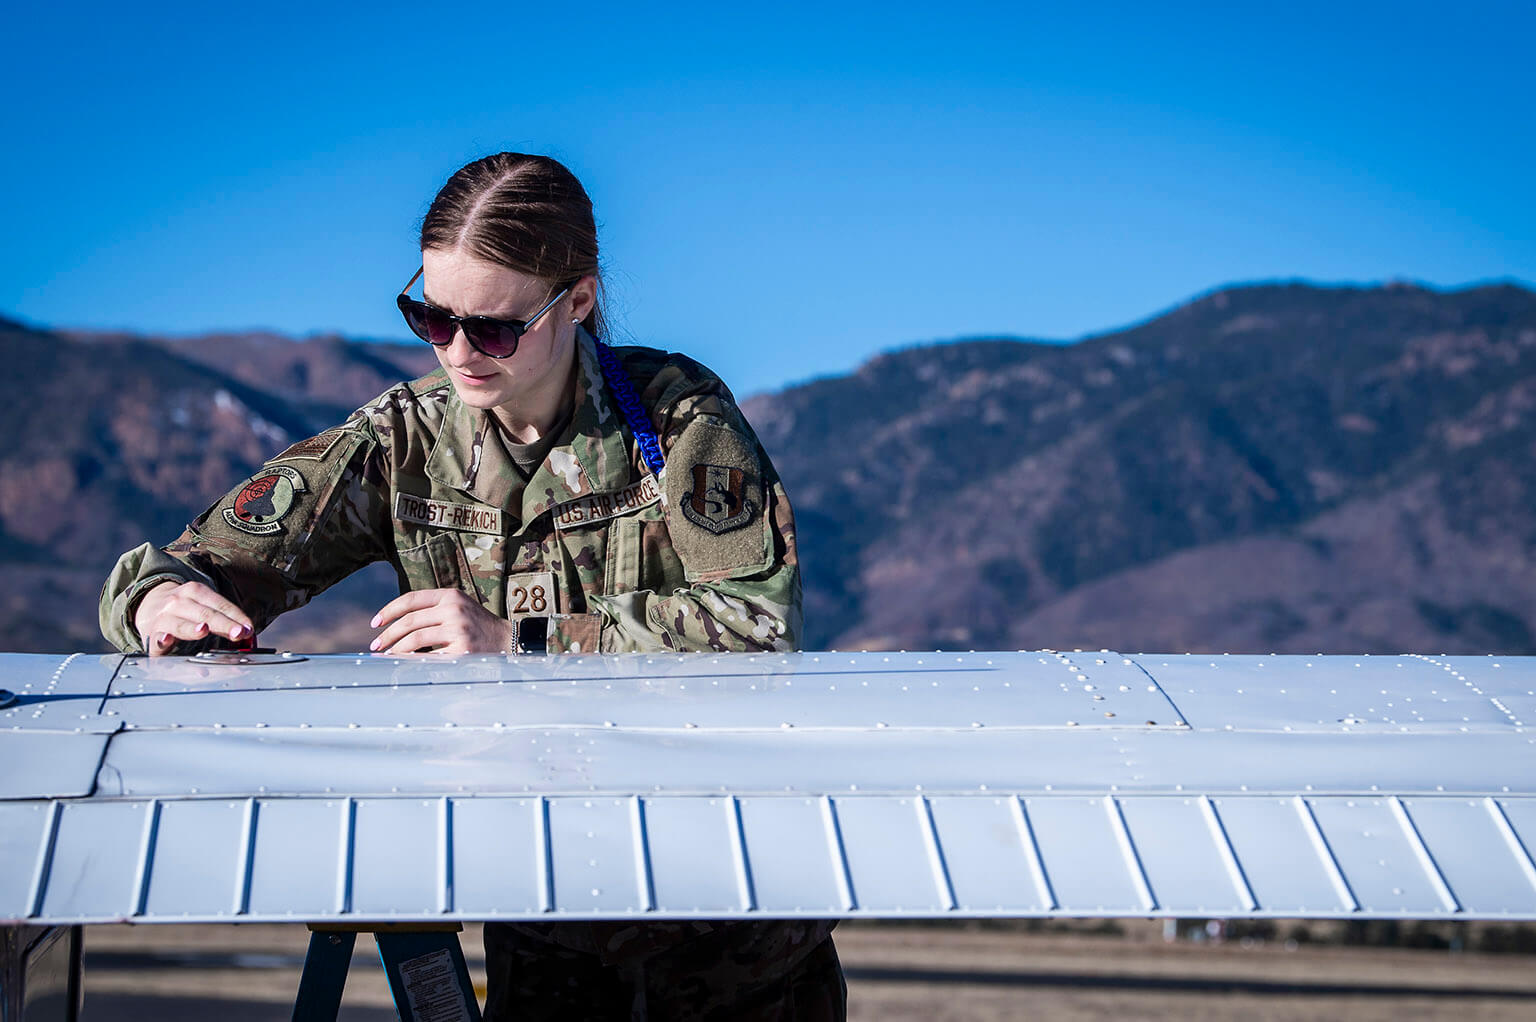 Cadet with plane wing